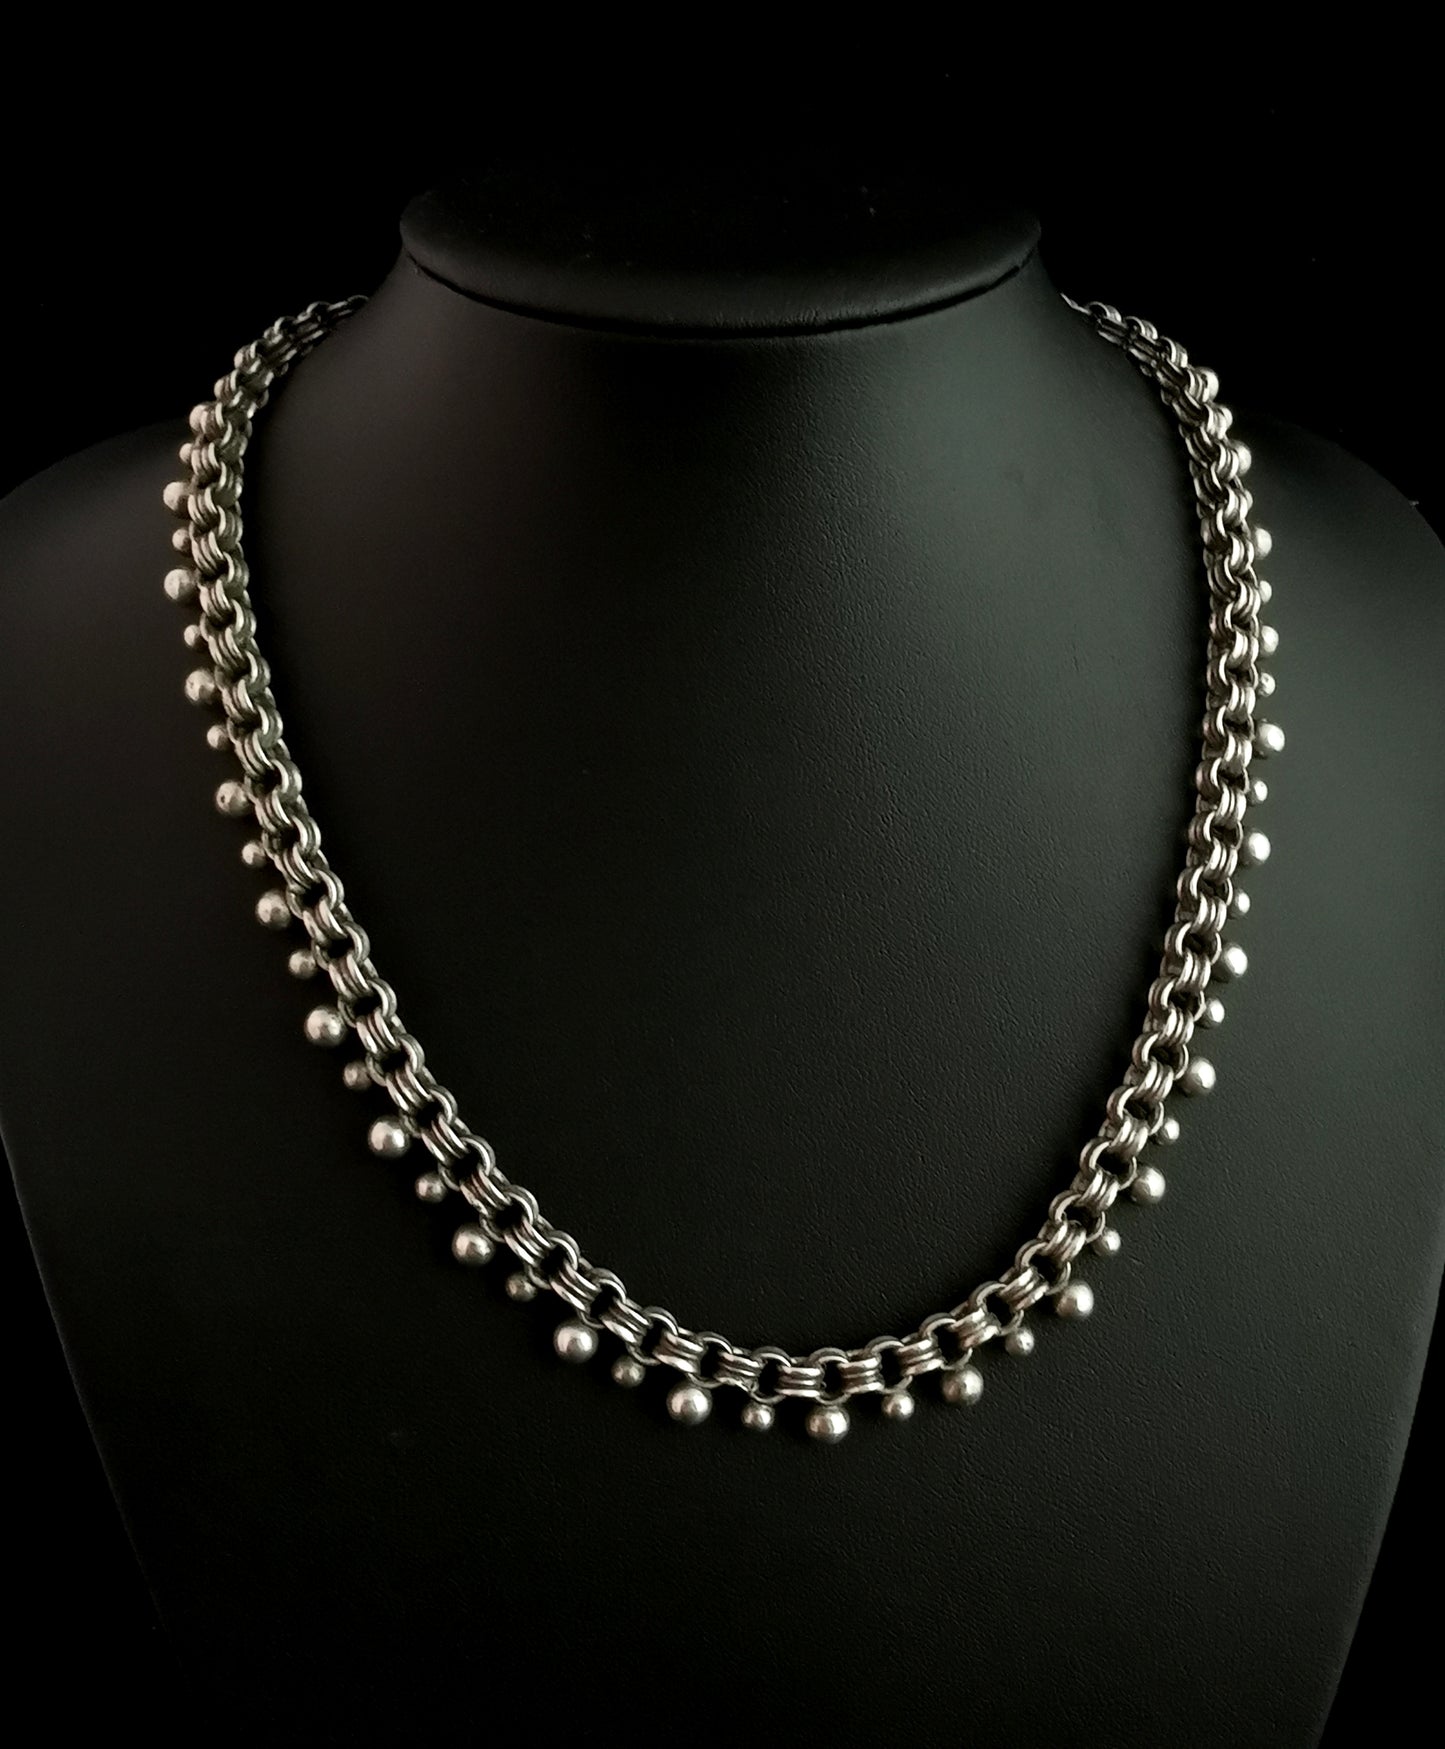 Victorian silver collar necklace, beaded chain